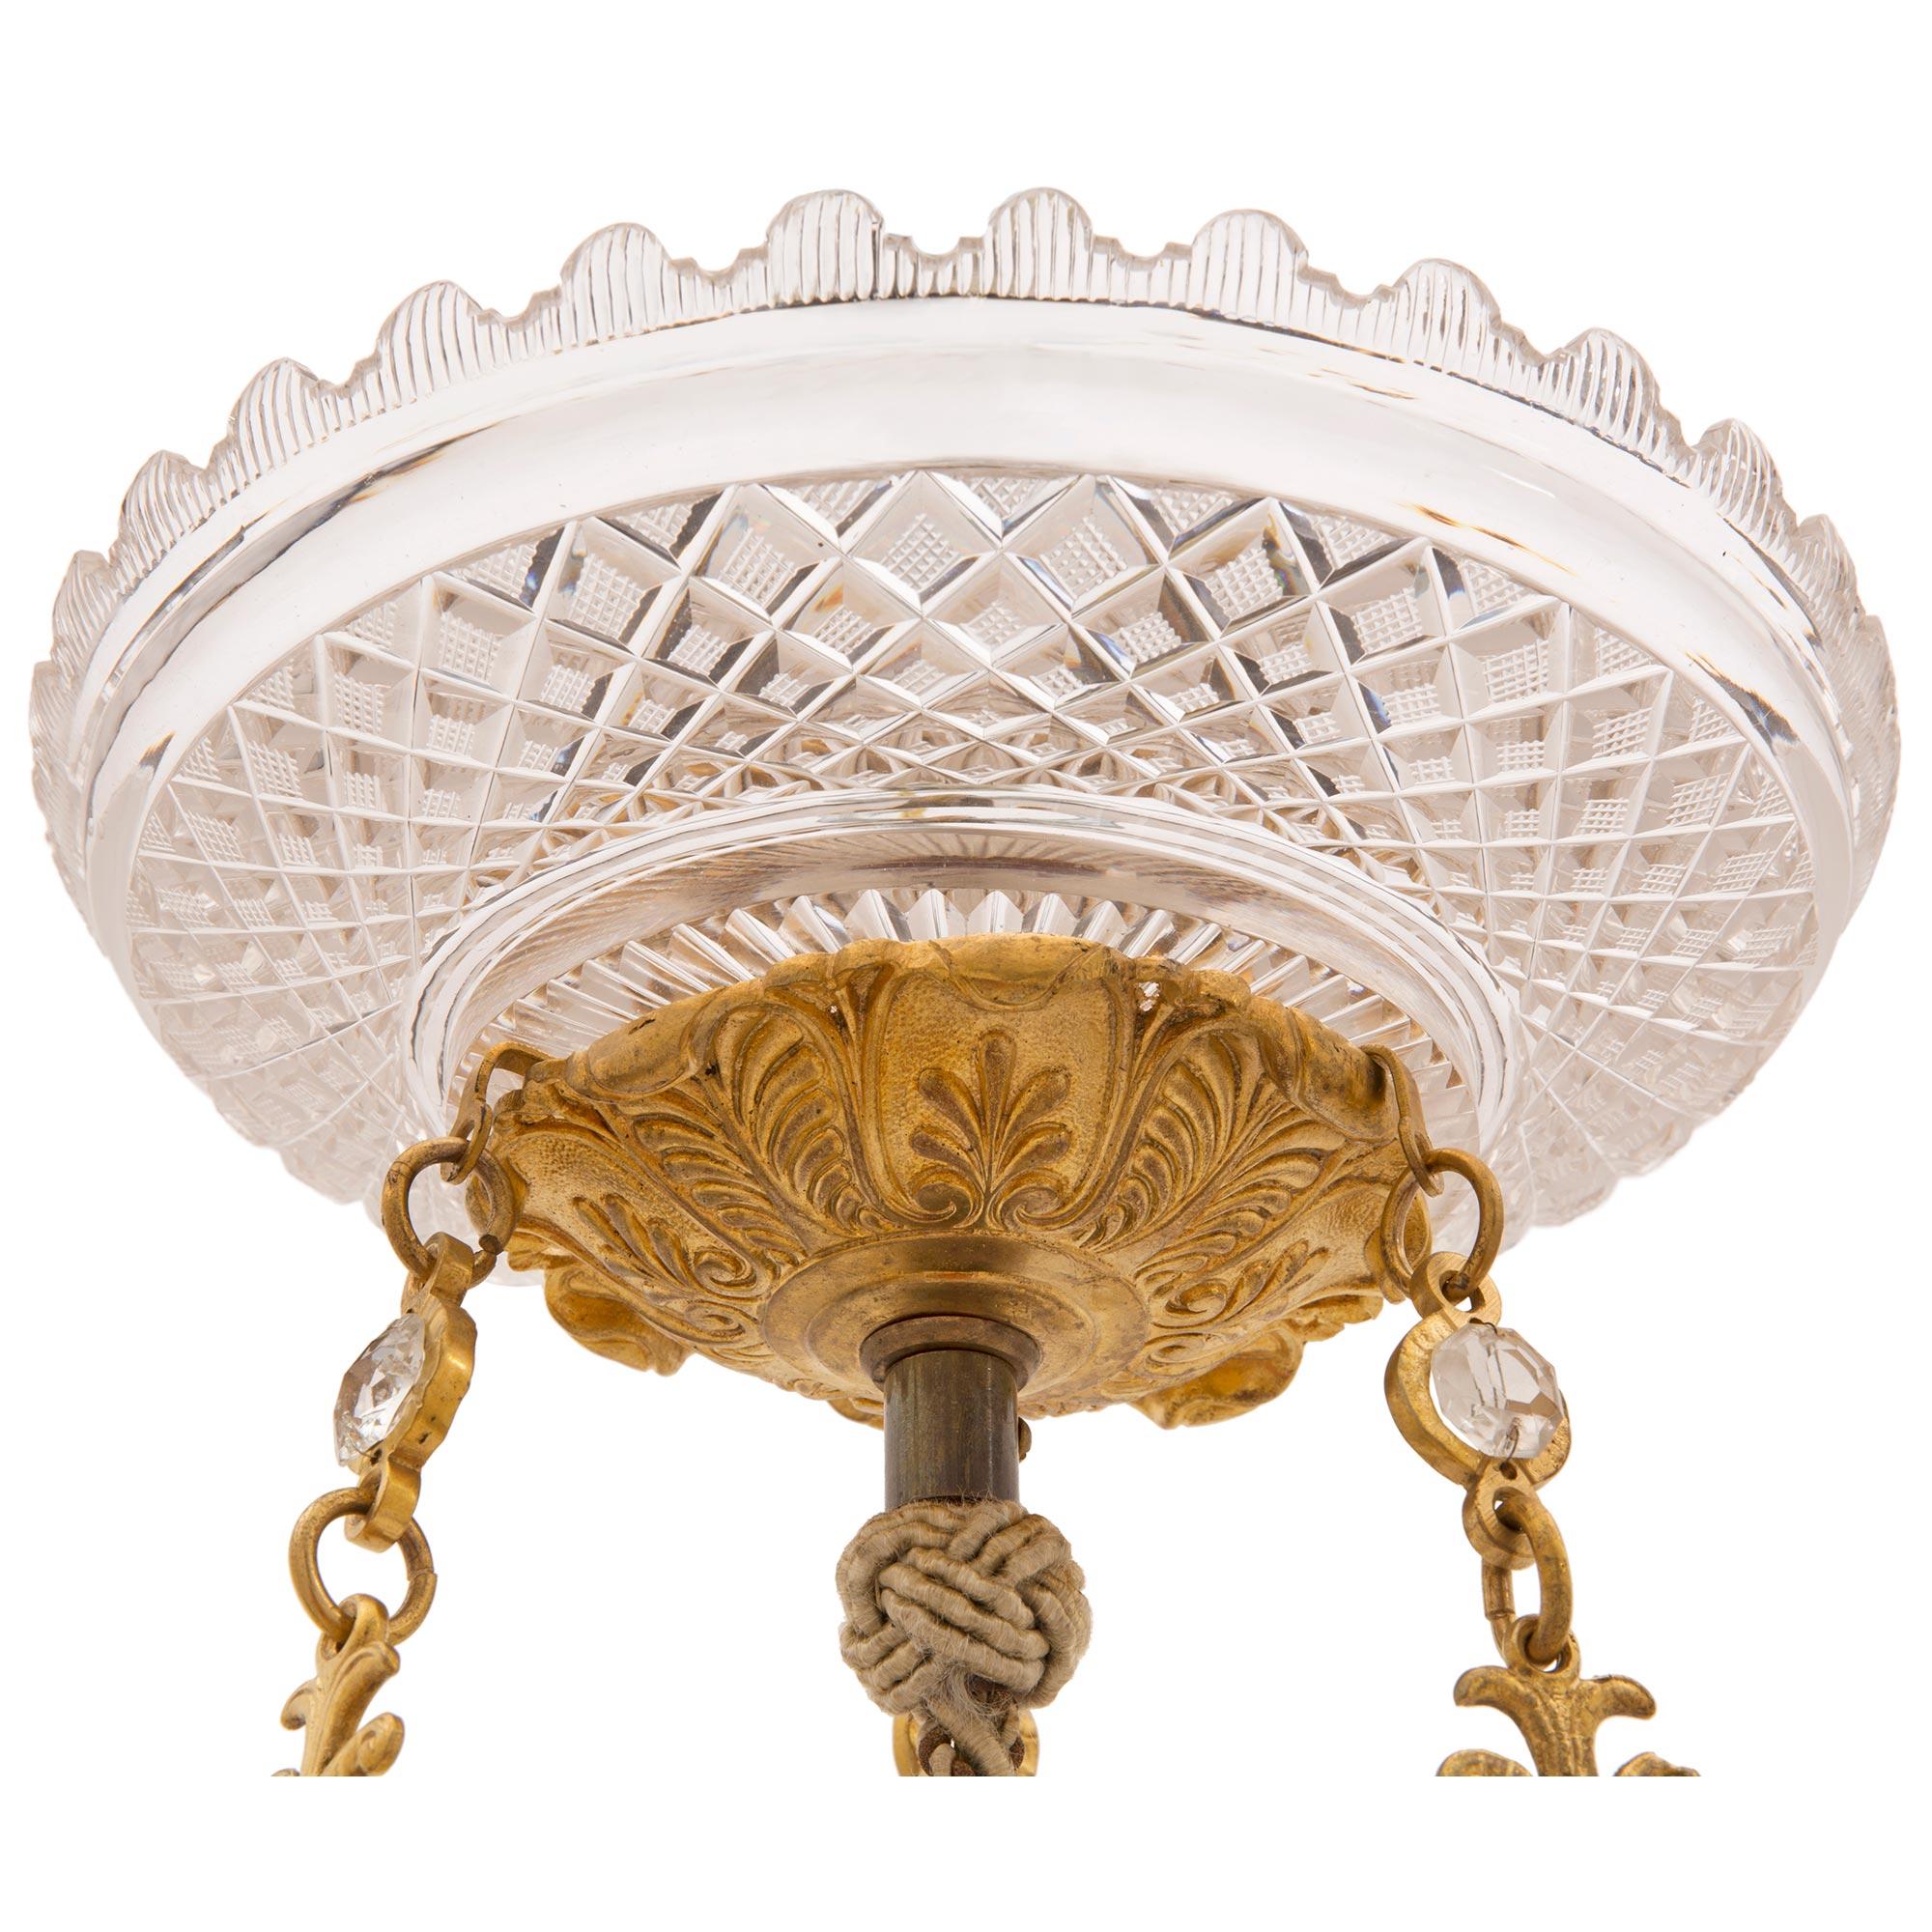 French Early 19th Century 1st Empire Period Baccarat Crystal & Ormolu Chandelier In Good Condition For Sale In West Palm Beach, FL